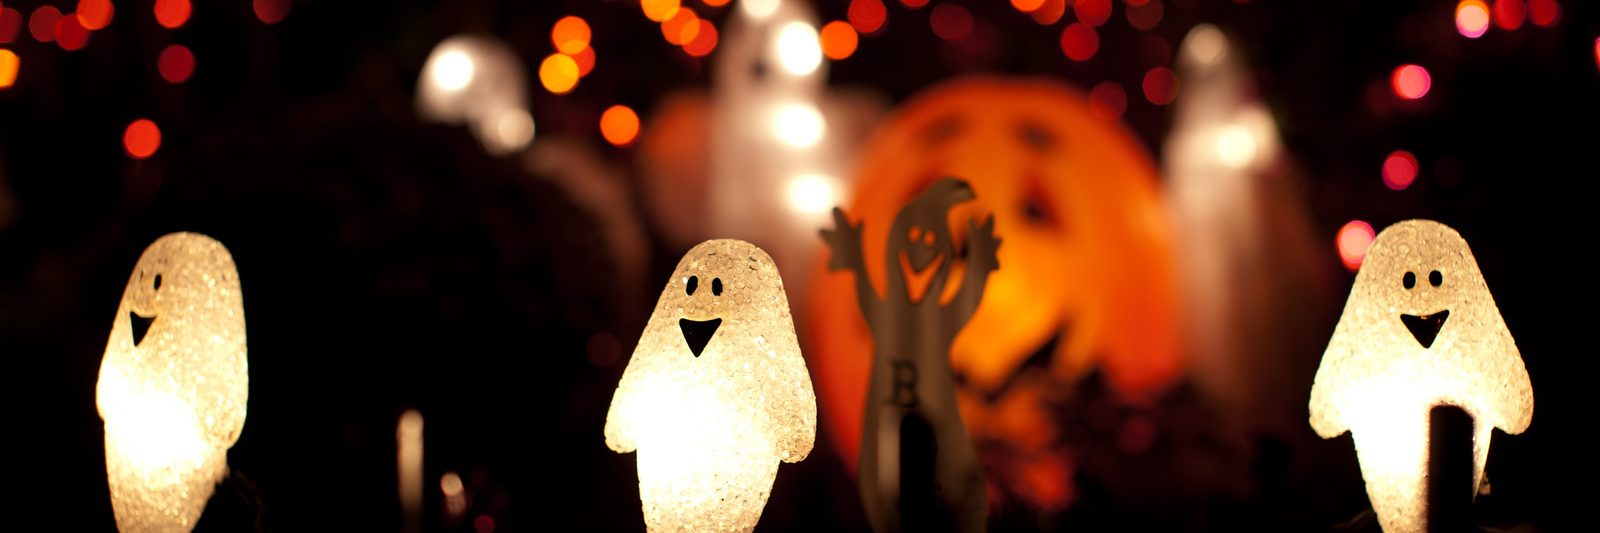 Ghost and pumpkin sting lights - Halloween Decoration -Things to do on Halloween San Diego